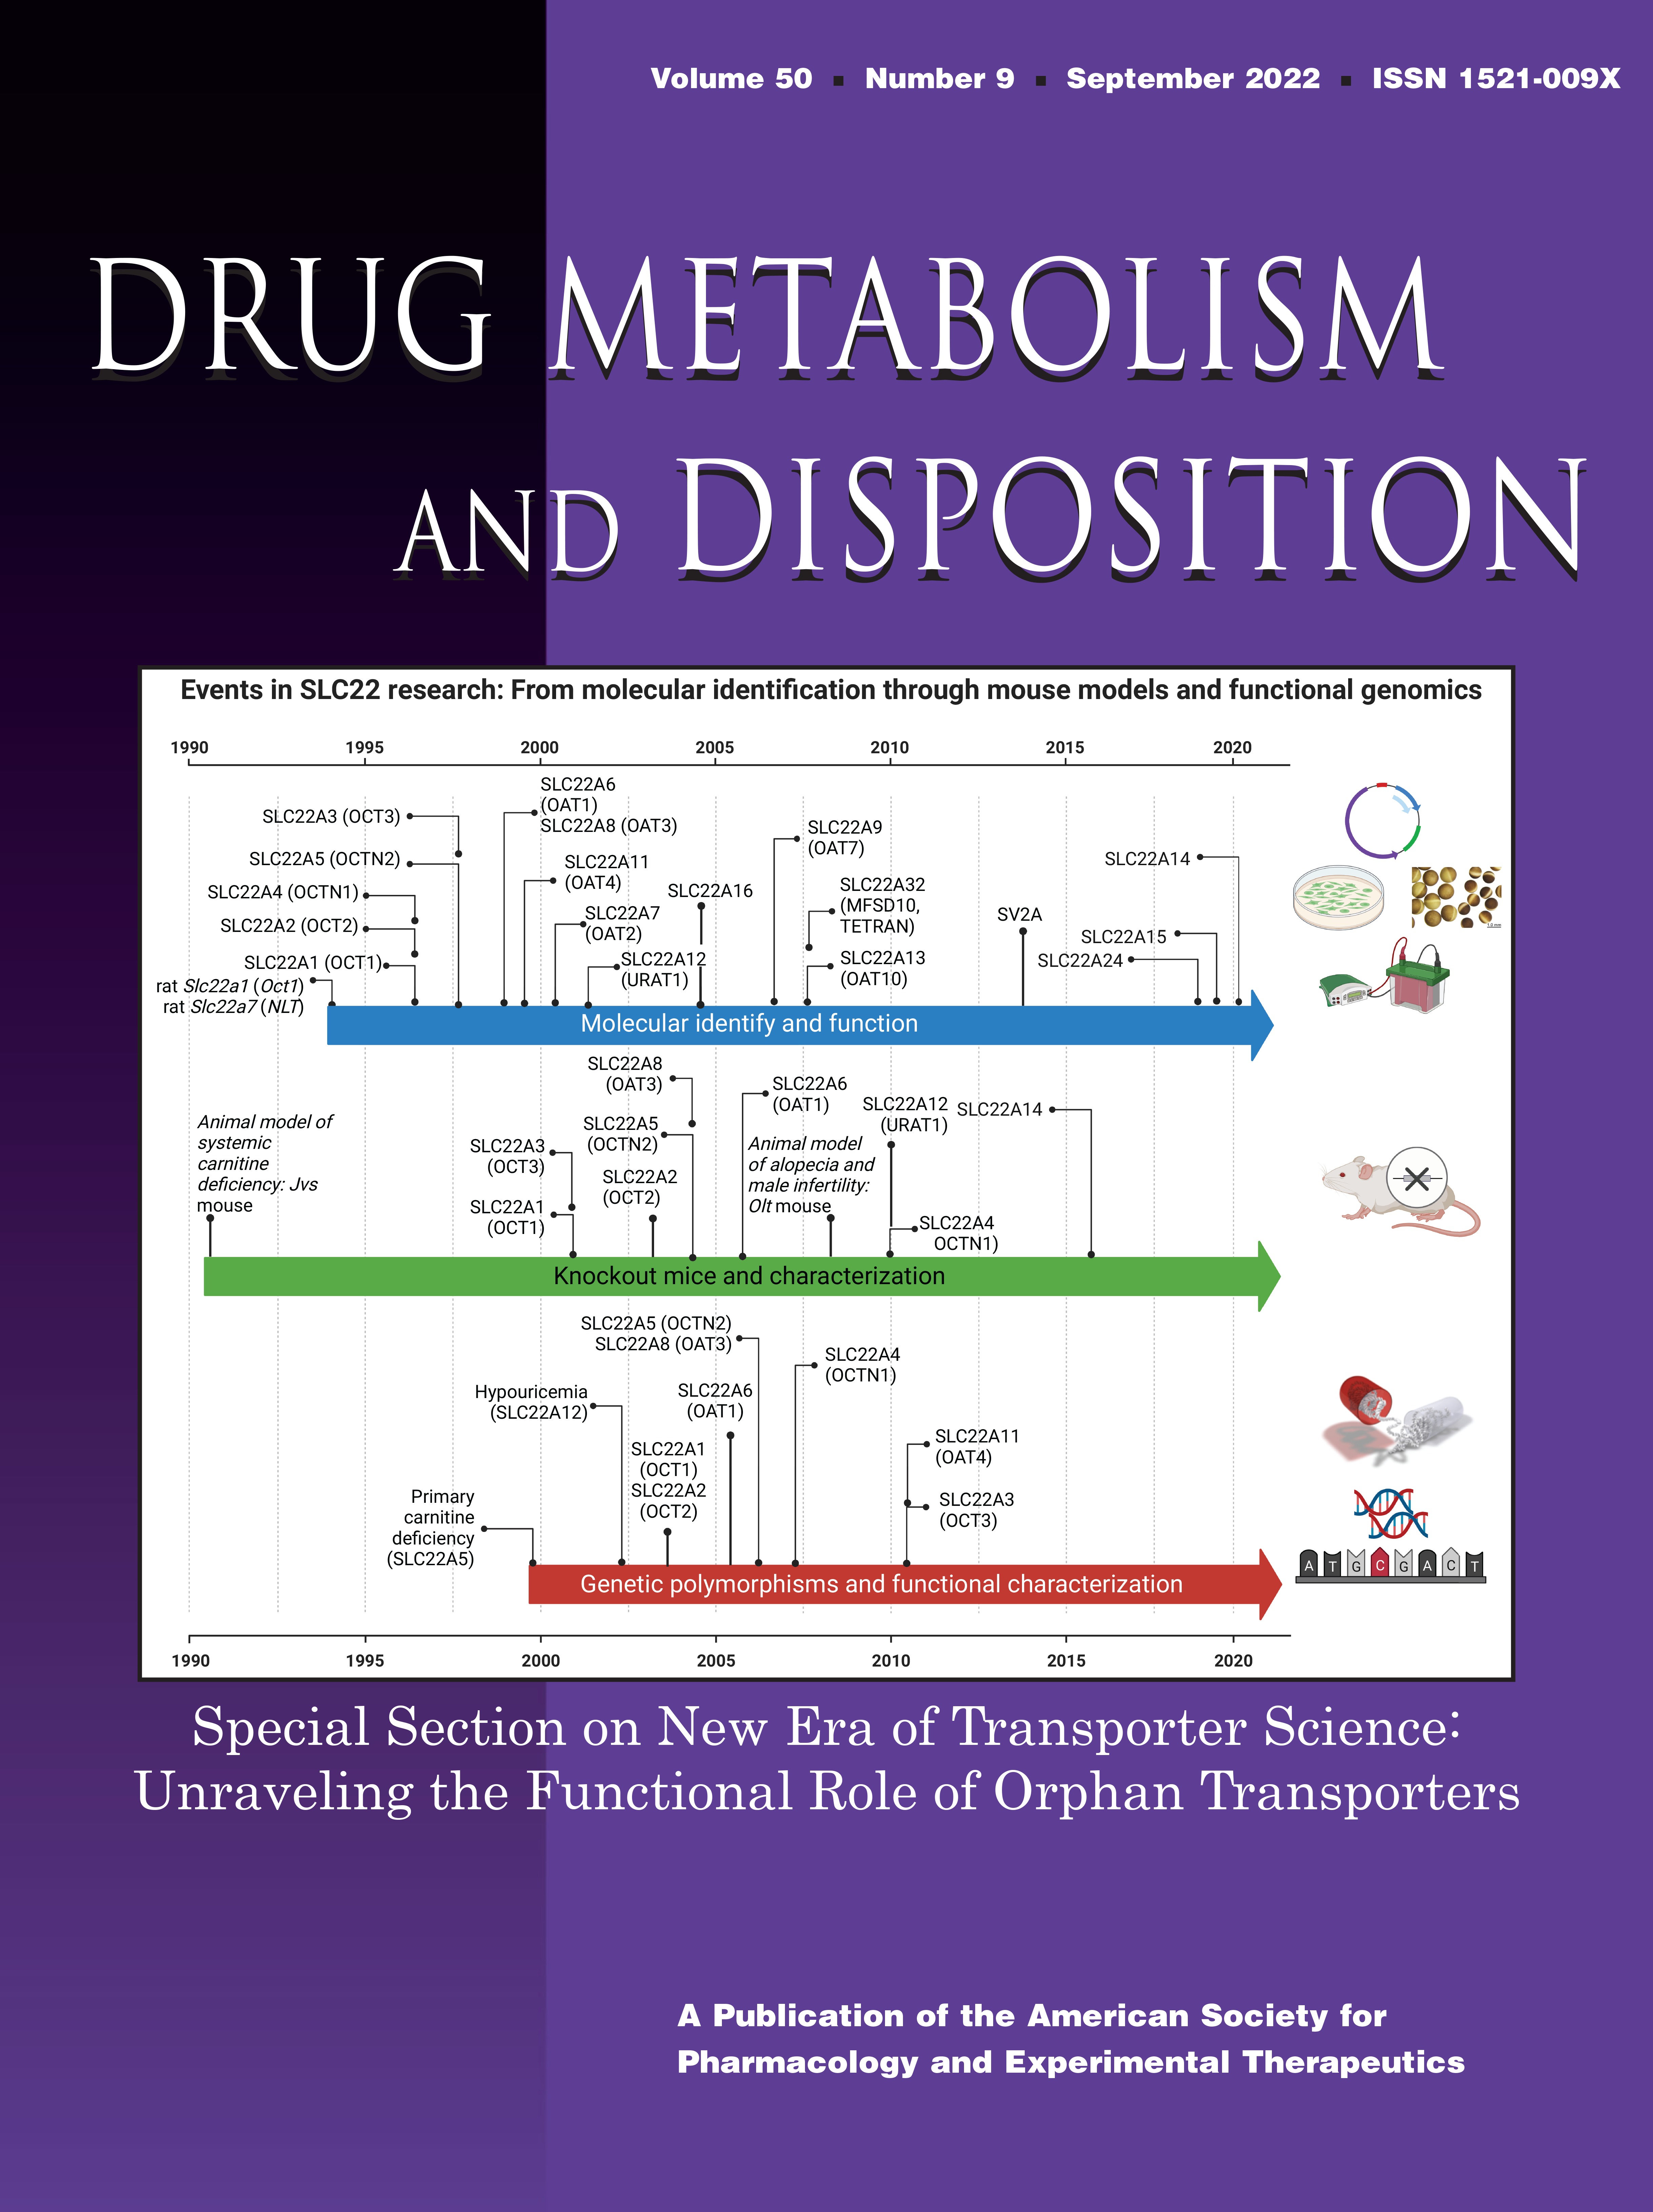 Special Section on New Era of Transporter Science: Unraveling the Functional Role of Orphan Transporters-Editorial [Special Section on New Era of Transporter Science: Unraveling the Functional Role of Orphan Transporters]